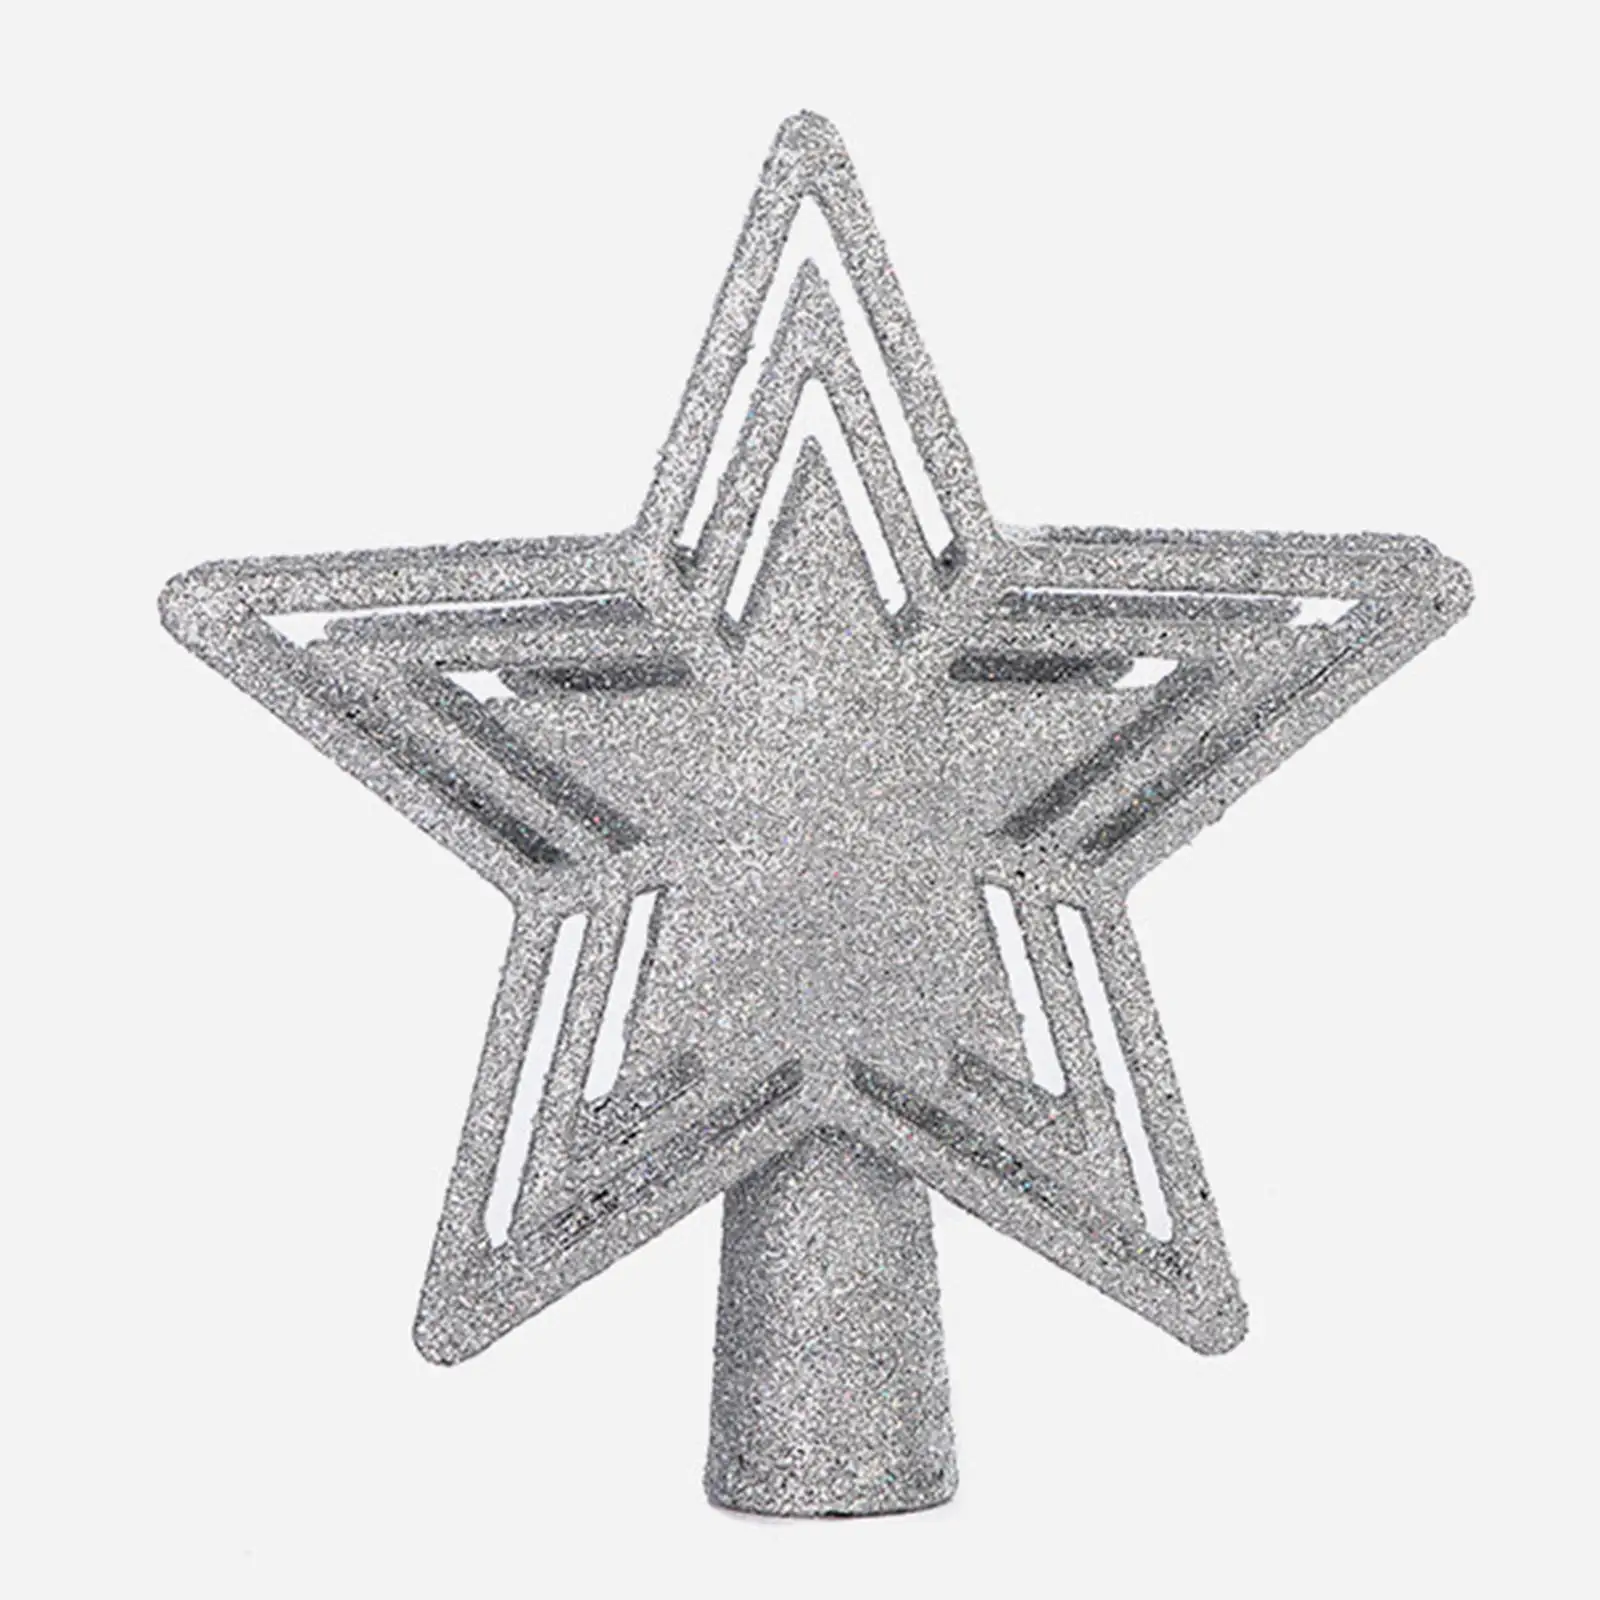 Glitter Christmas Tree Topper Lighted Star Tree Topper with Snowflake Projector Light Christmas Party Decoration